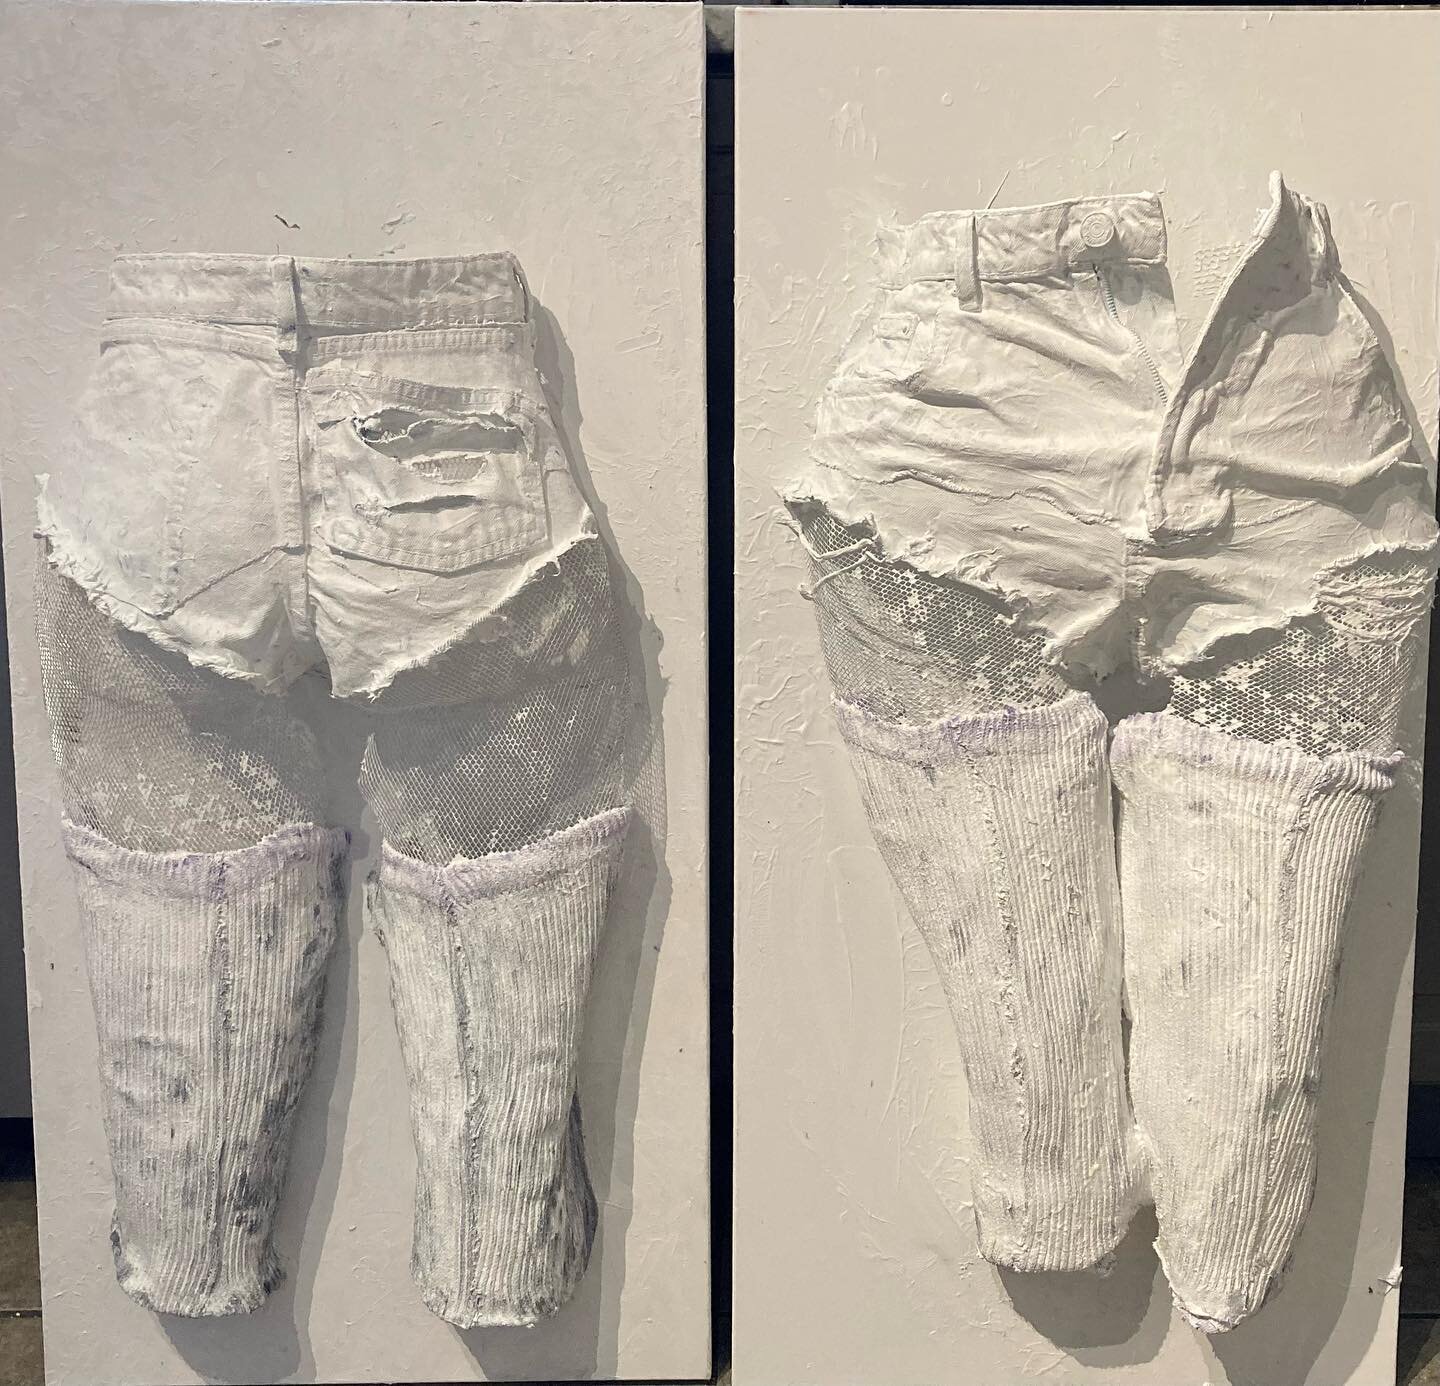 Here&rsquo;s a sneak peak at some work in progress! 2 pieces of aluminum mesh and fabric sculptures that are 18&rdquo;x36&rdquo; each. 
I am ramping up my creative output and doing more of my staple aluminum and fabric hybrids along with some unique 